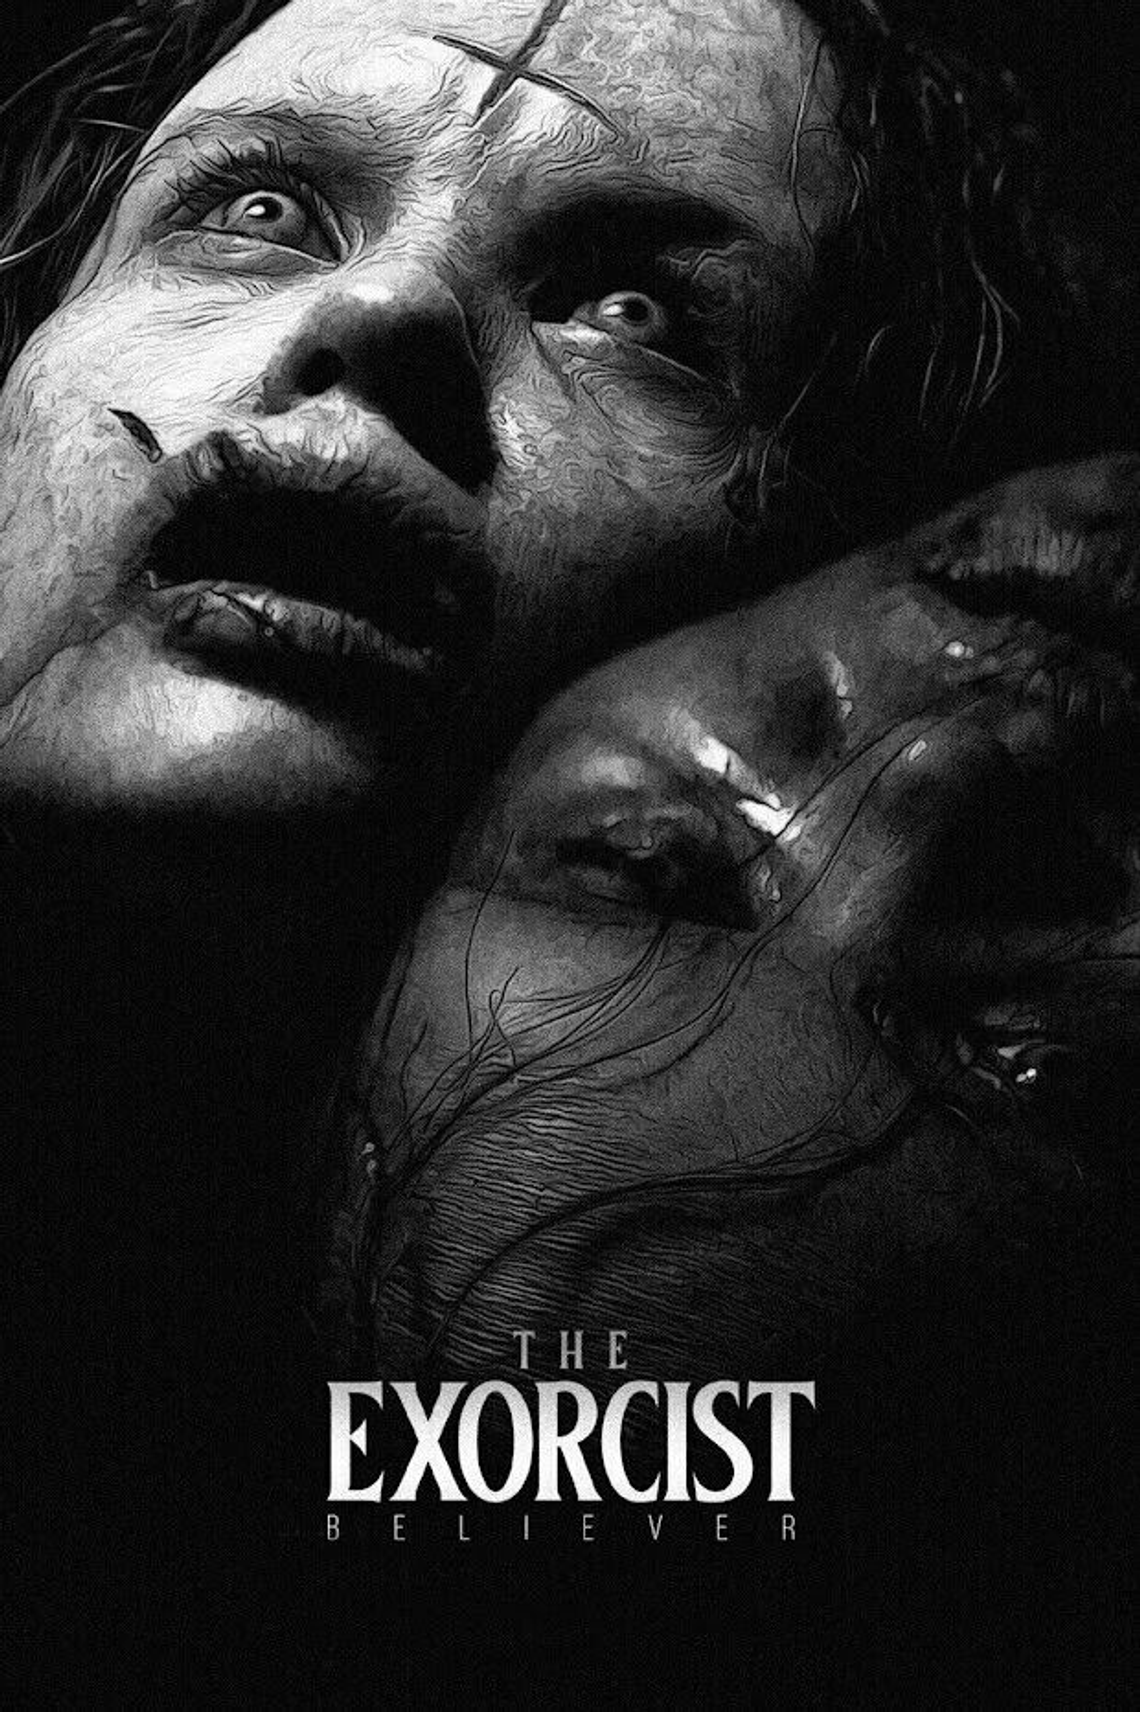 Movie Review: “The Exorcist: Believer”